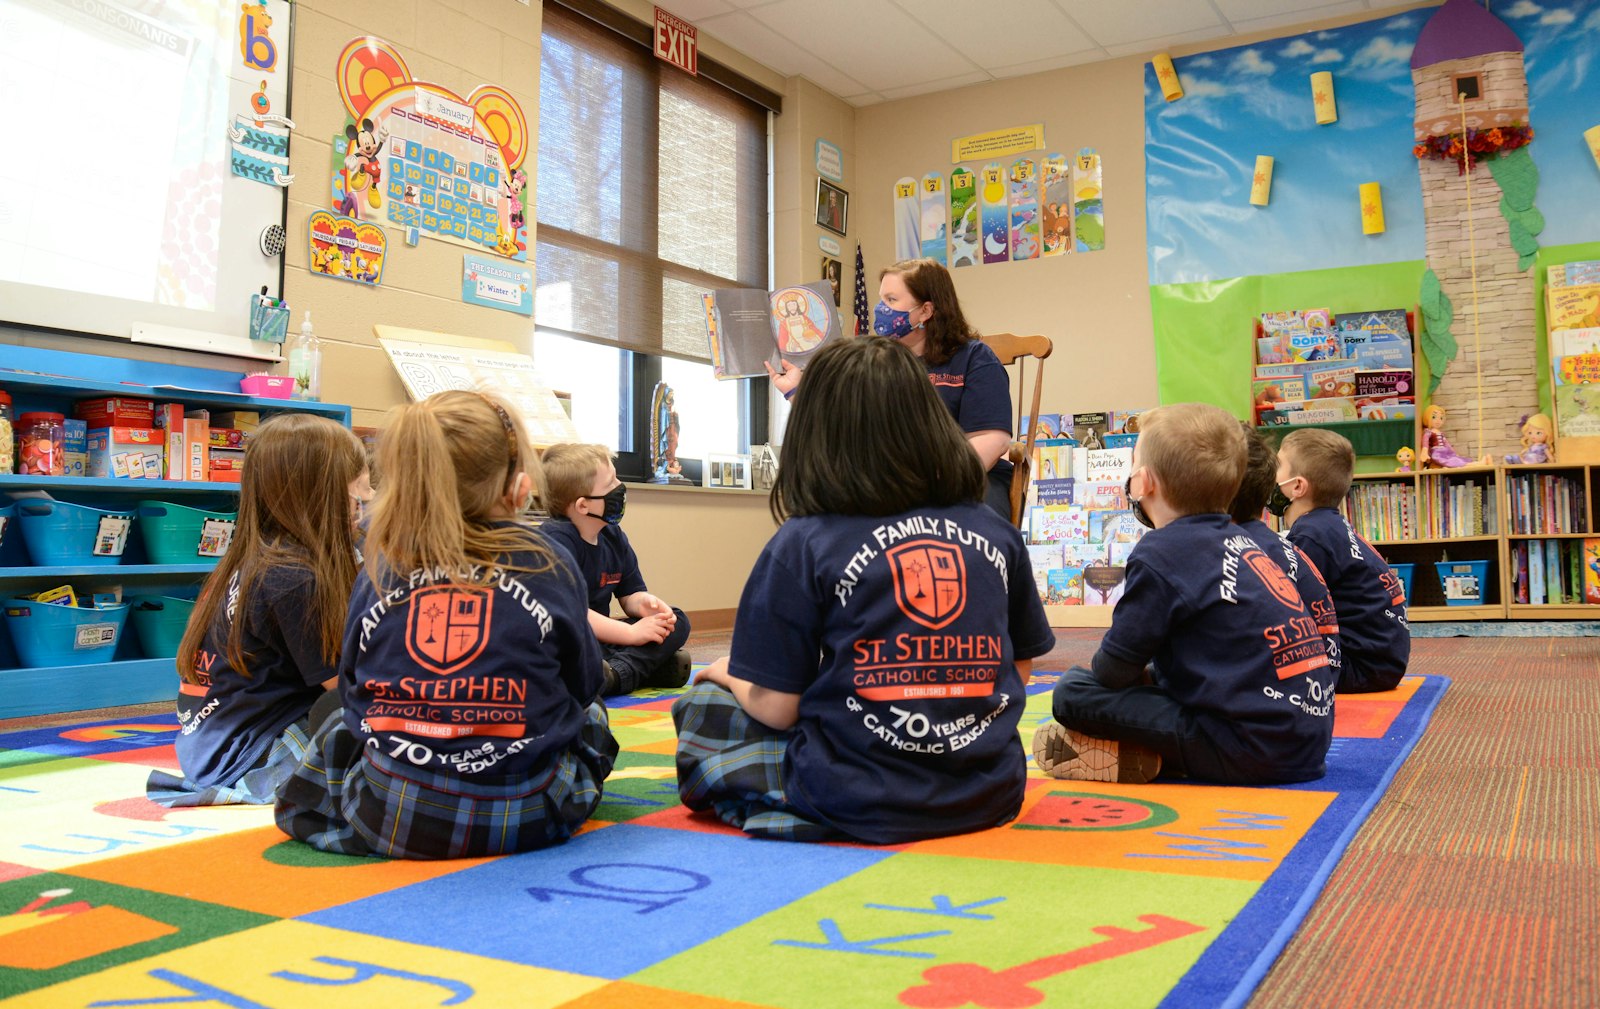 St. Stephen students listen to a story read by their teacher while wearing T-shirts showing the school's logo and motto. Many school families are multi-generational, school leaders say.